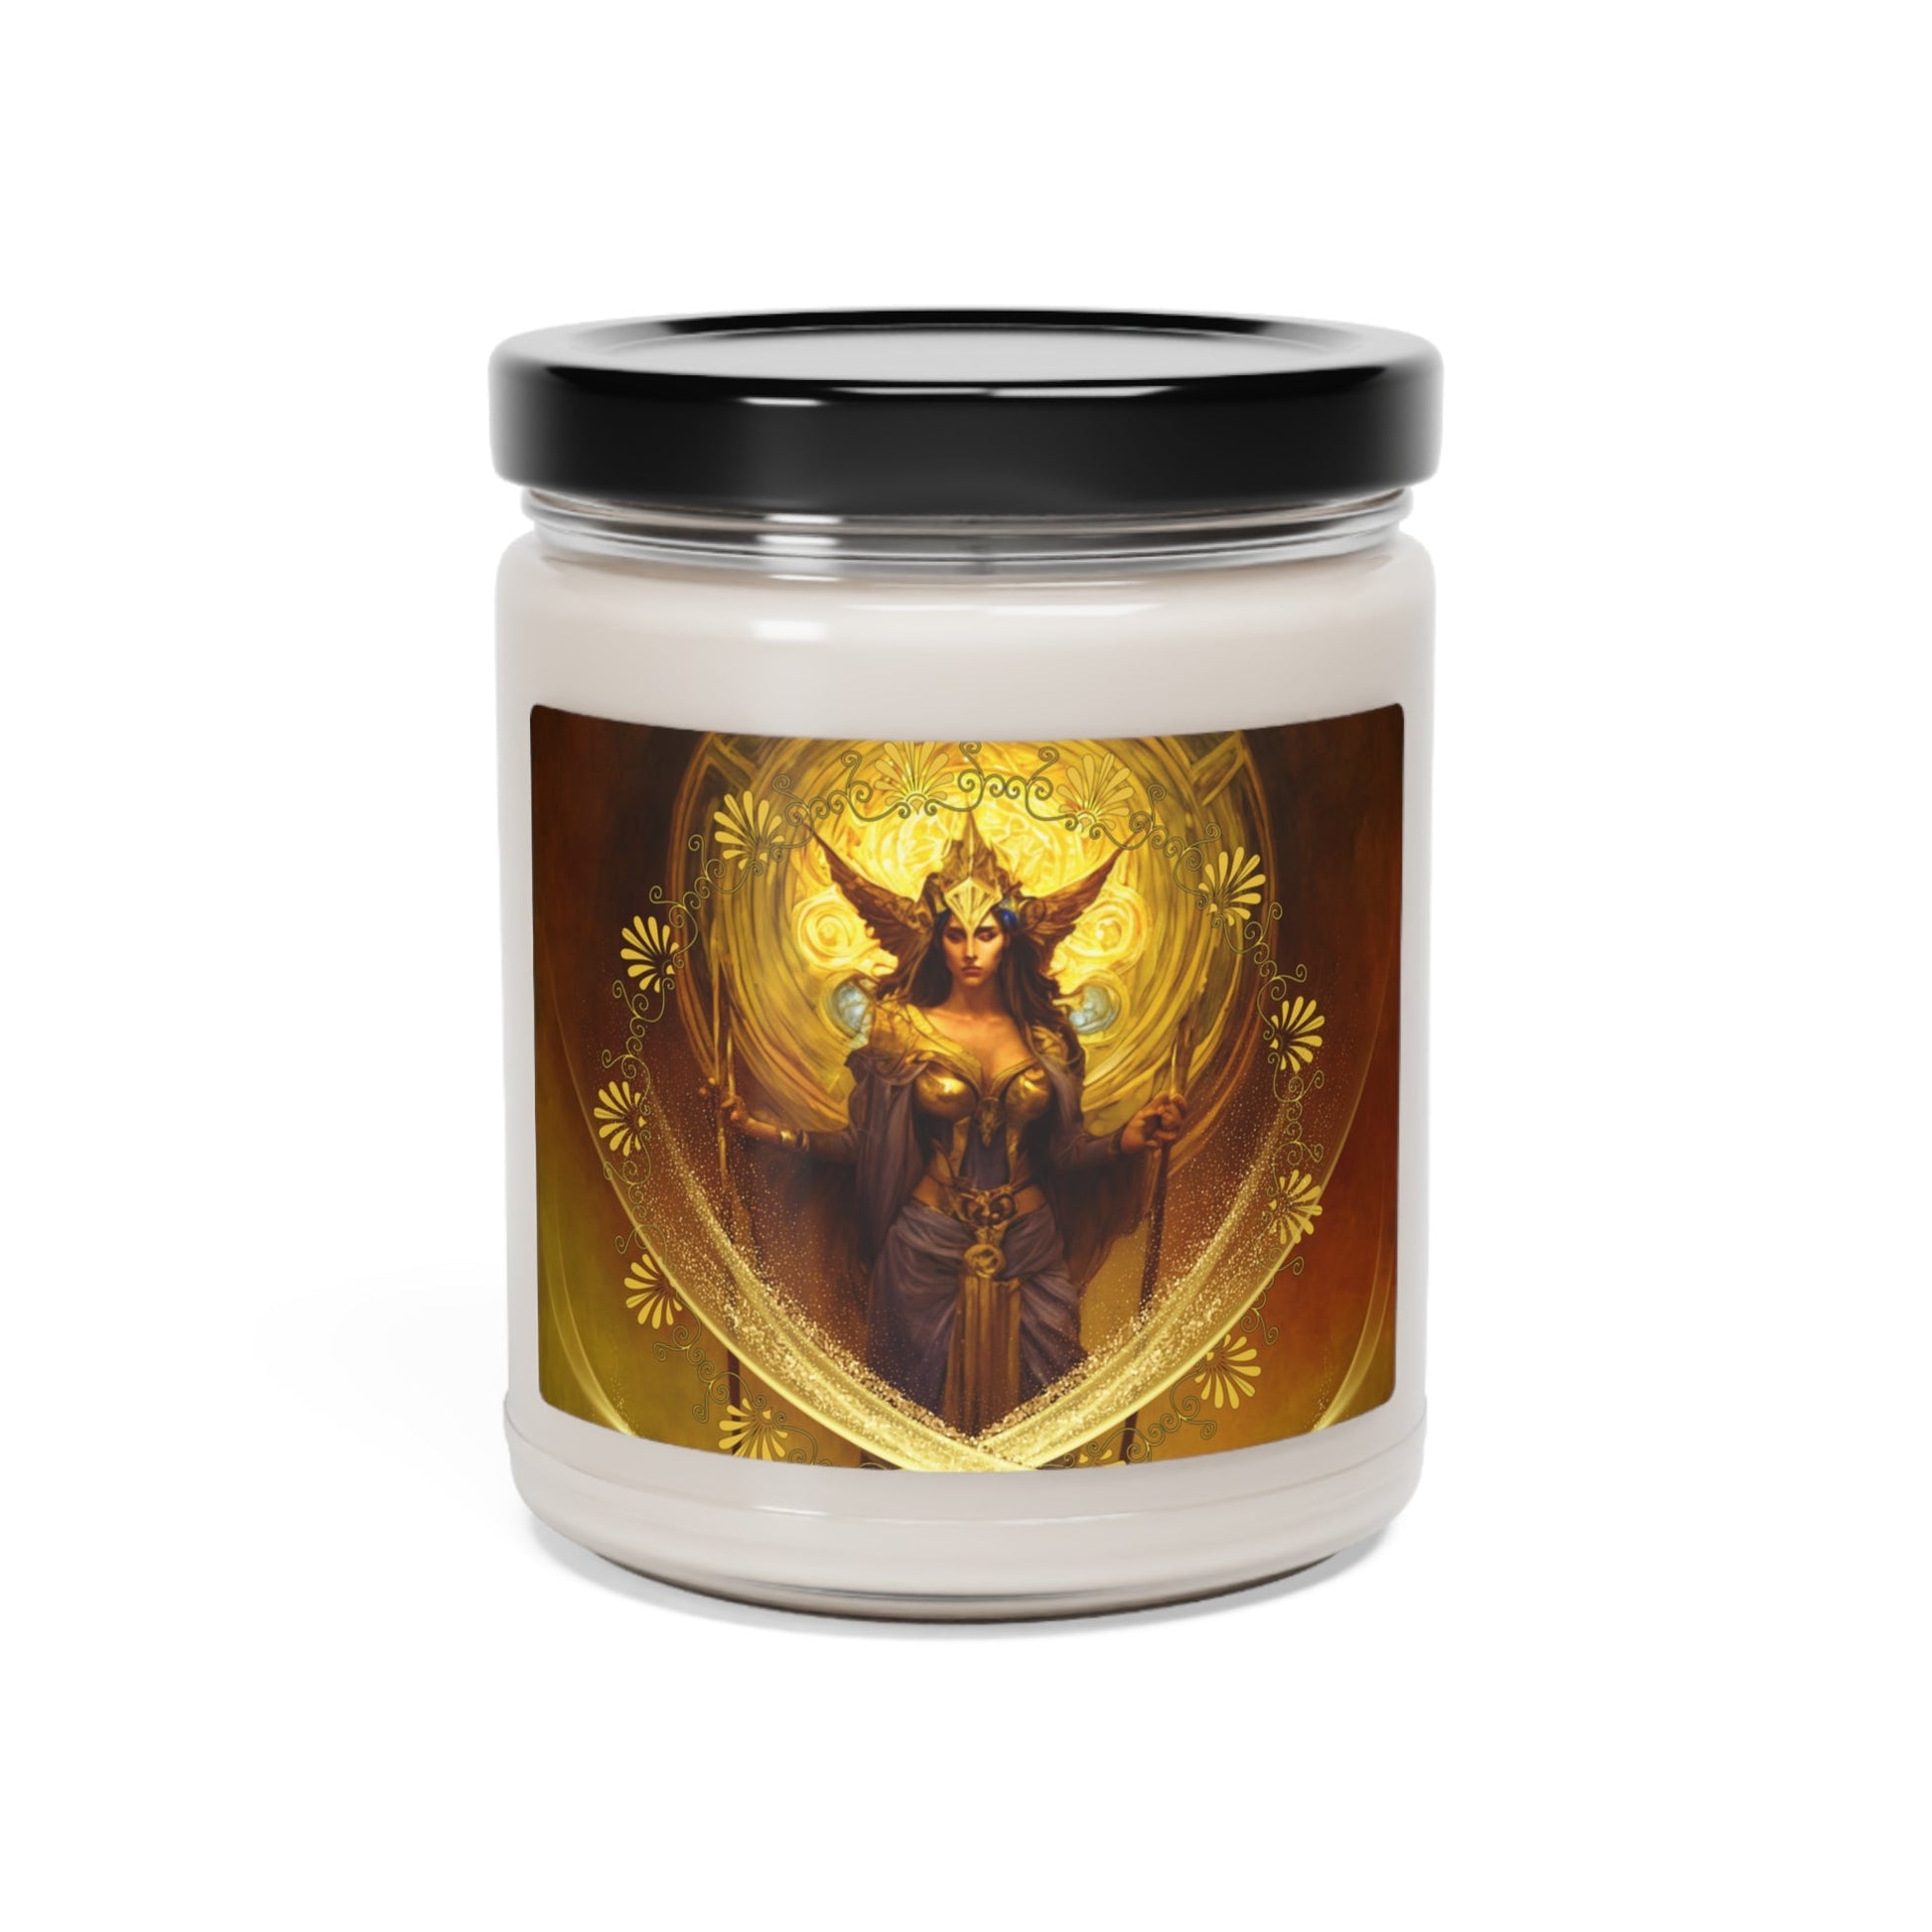 Goddess-Hecate-Scented-Soy-Candle-for-offerings-rituals-initiations-or-praying-and-meditation-6